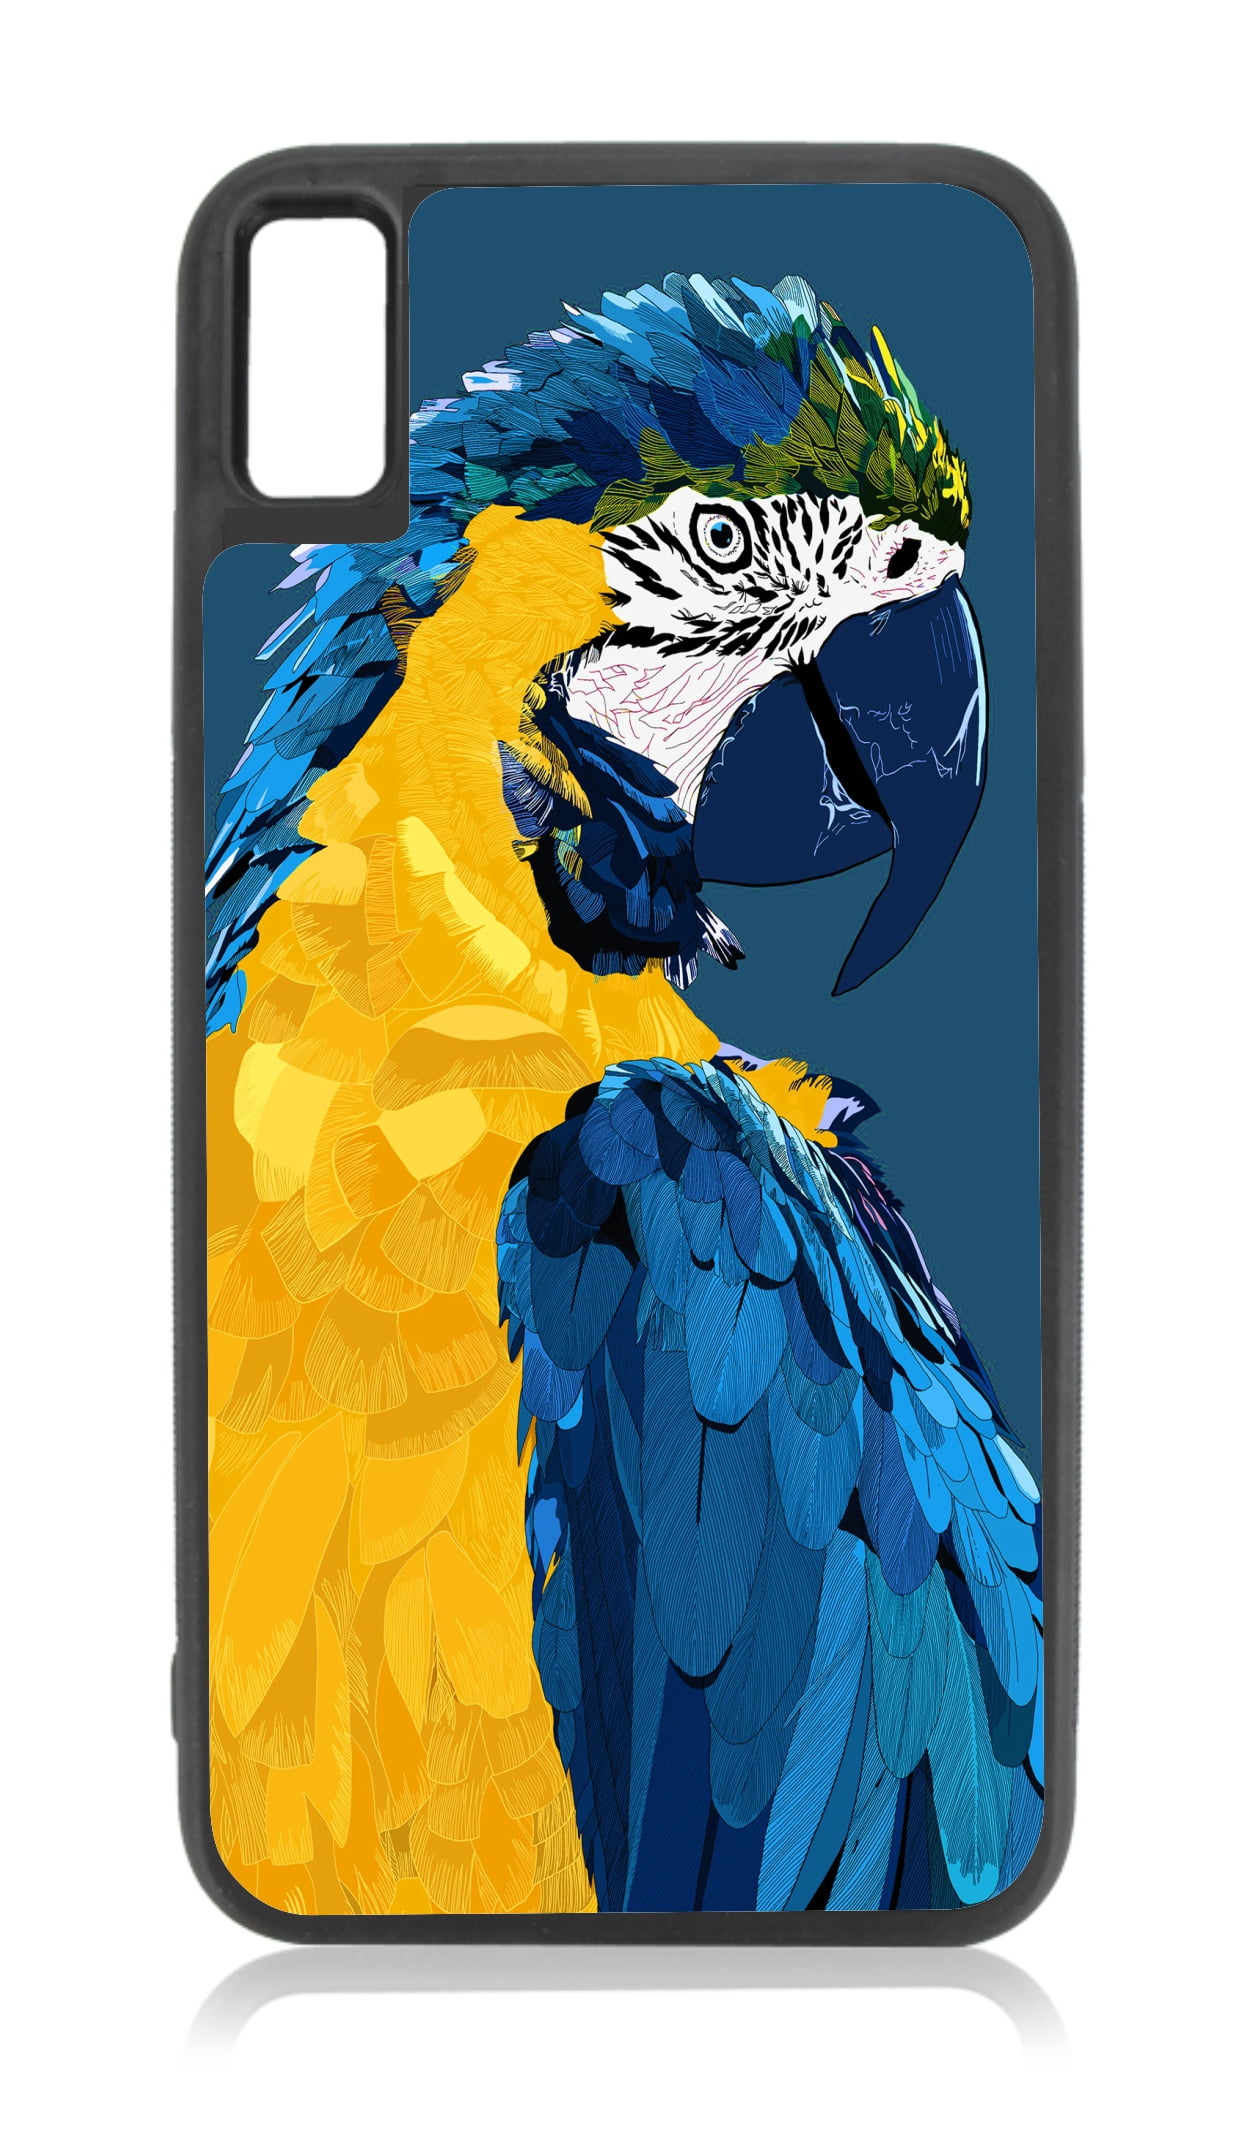 Parrot Blue Bird Tropical Pattern Flip Phone Case Cover Premium Quality for iPhone 12 11 X XR XS Max 8 7 Samsung Galaxy